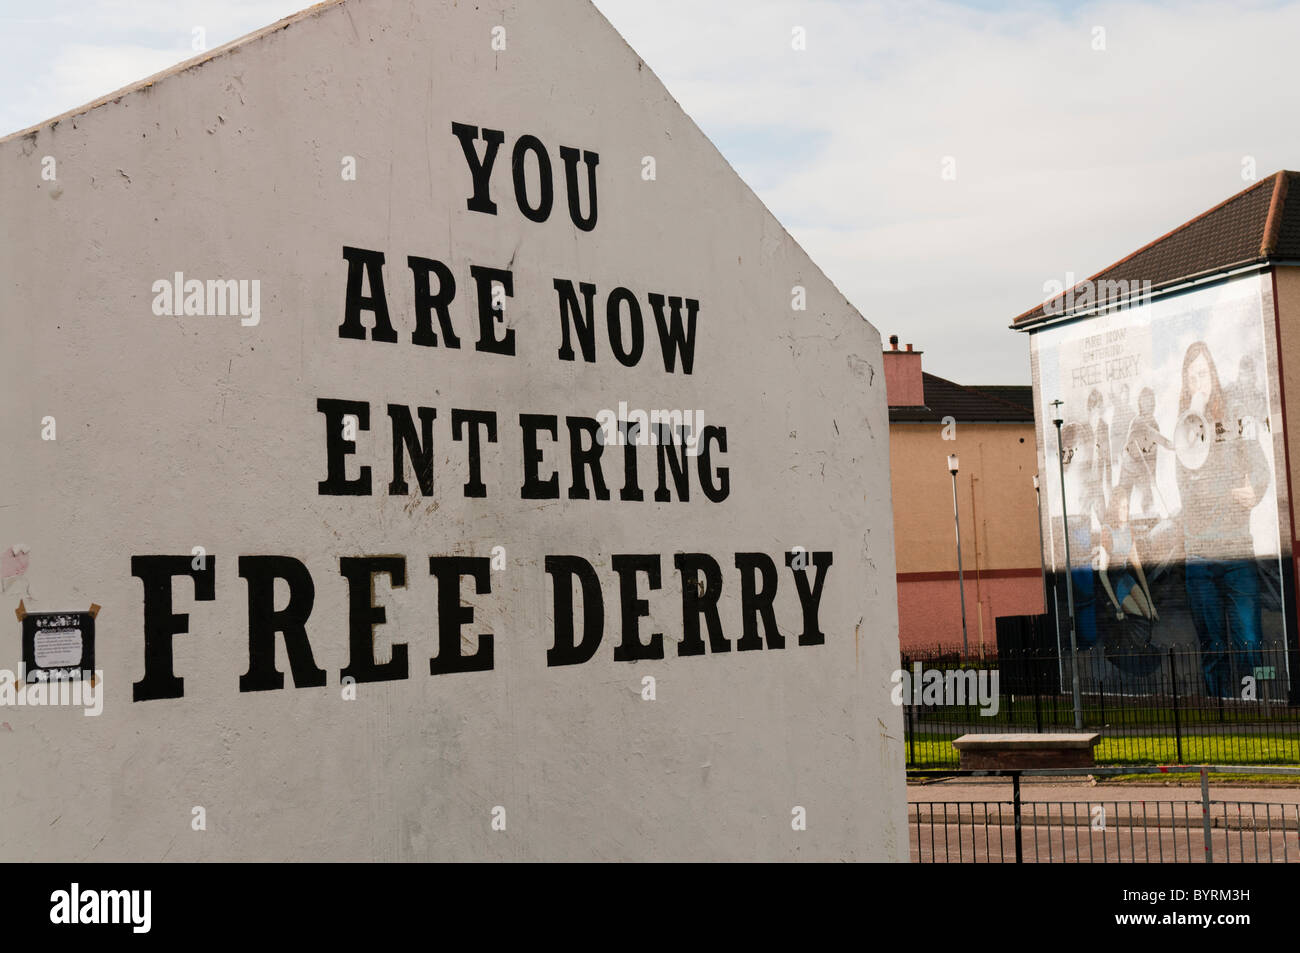 Free Derry Corner 'You are now entering Free Derry' Stock Photo